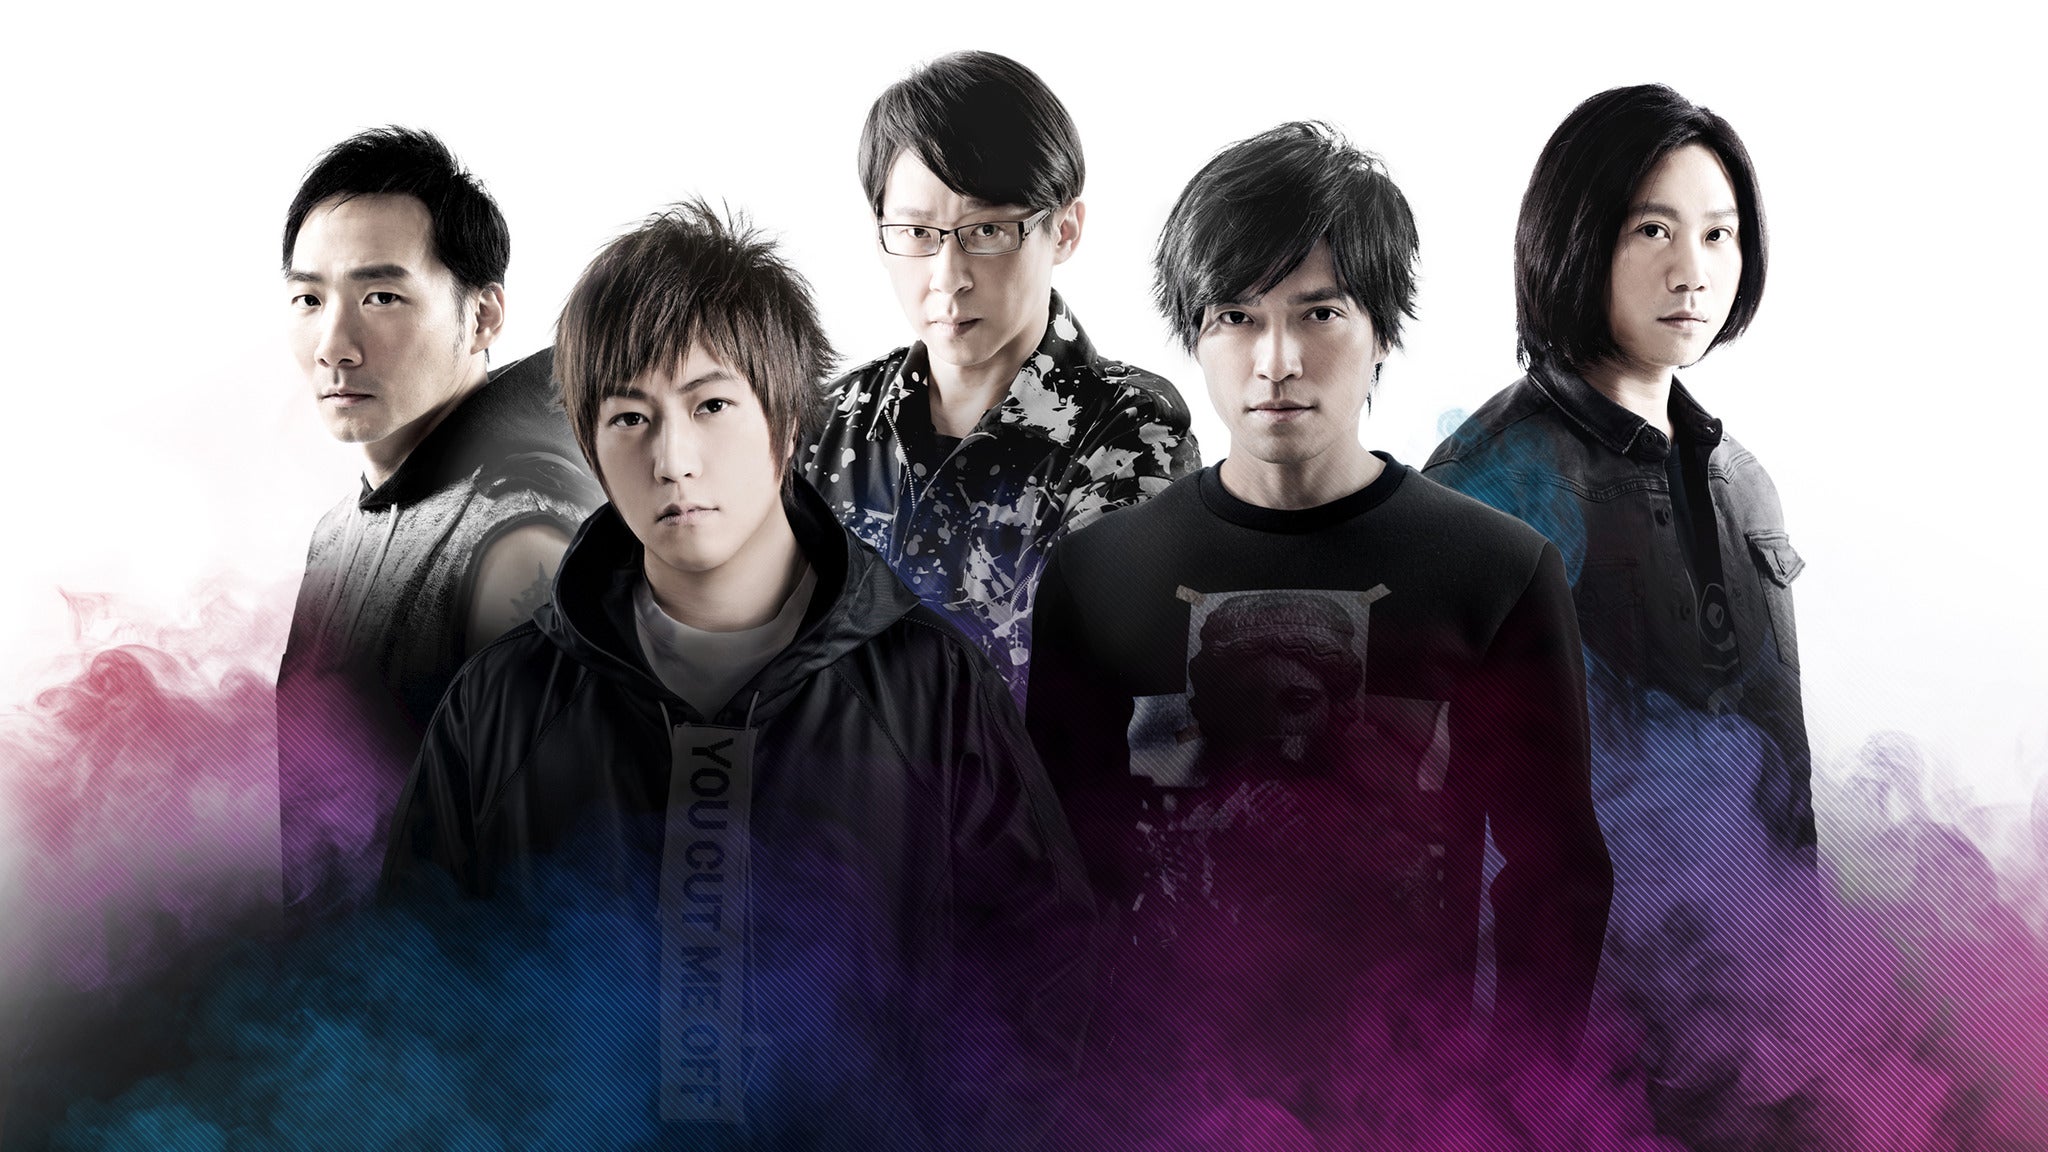 MAYDAY: LIFE WORLD TOUR in Anaheim promo photo for Live Nation Mobile App presale offer code